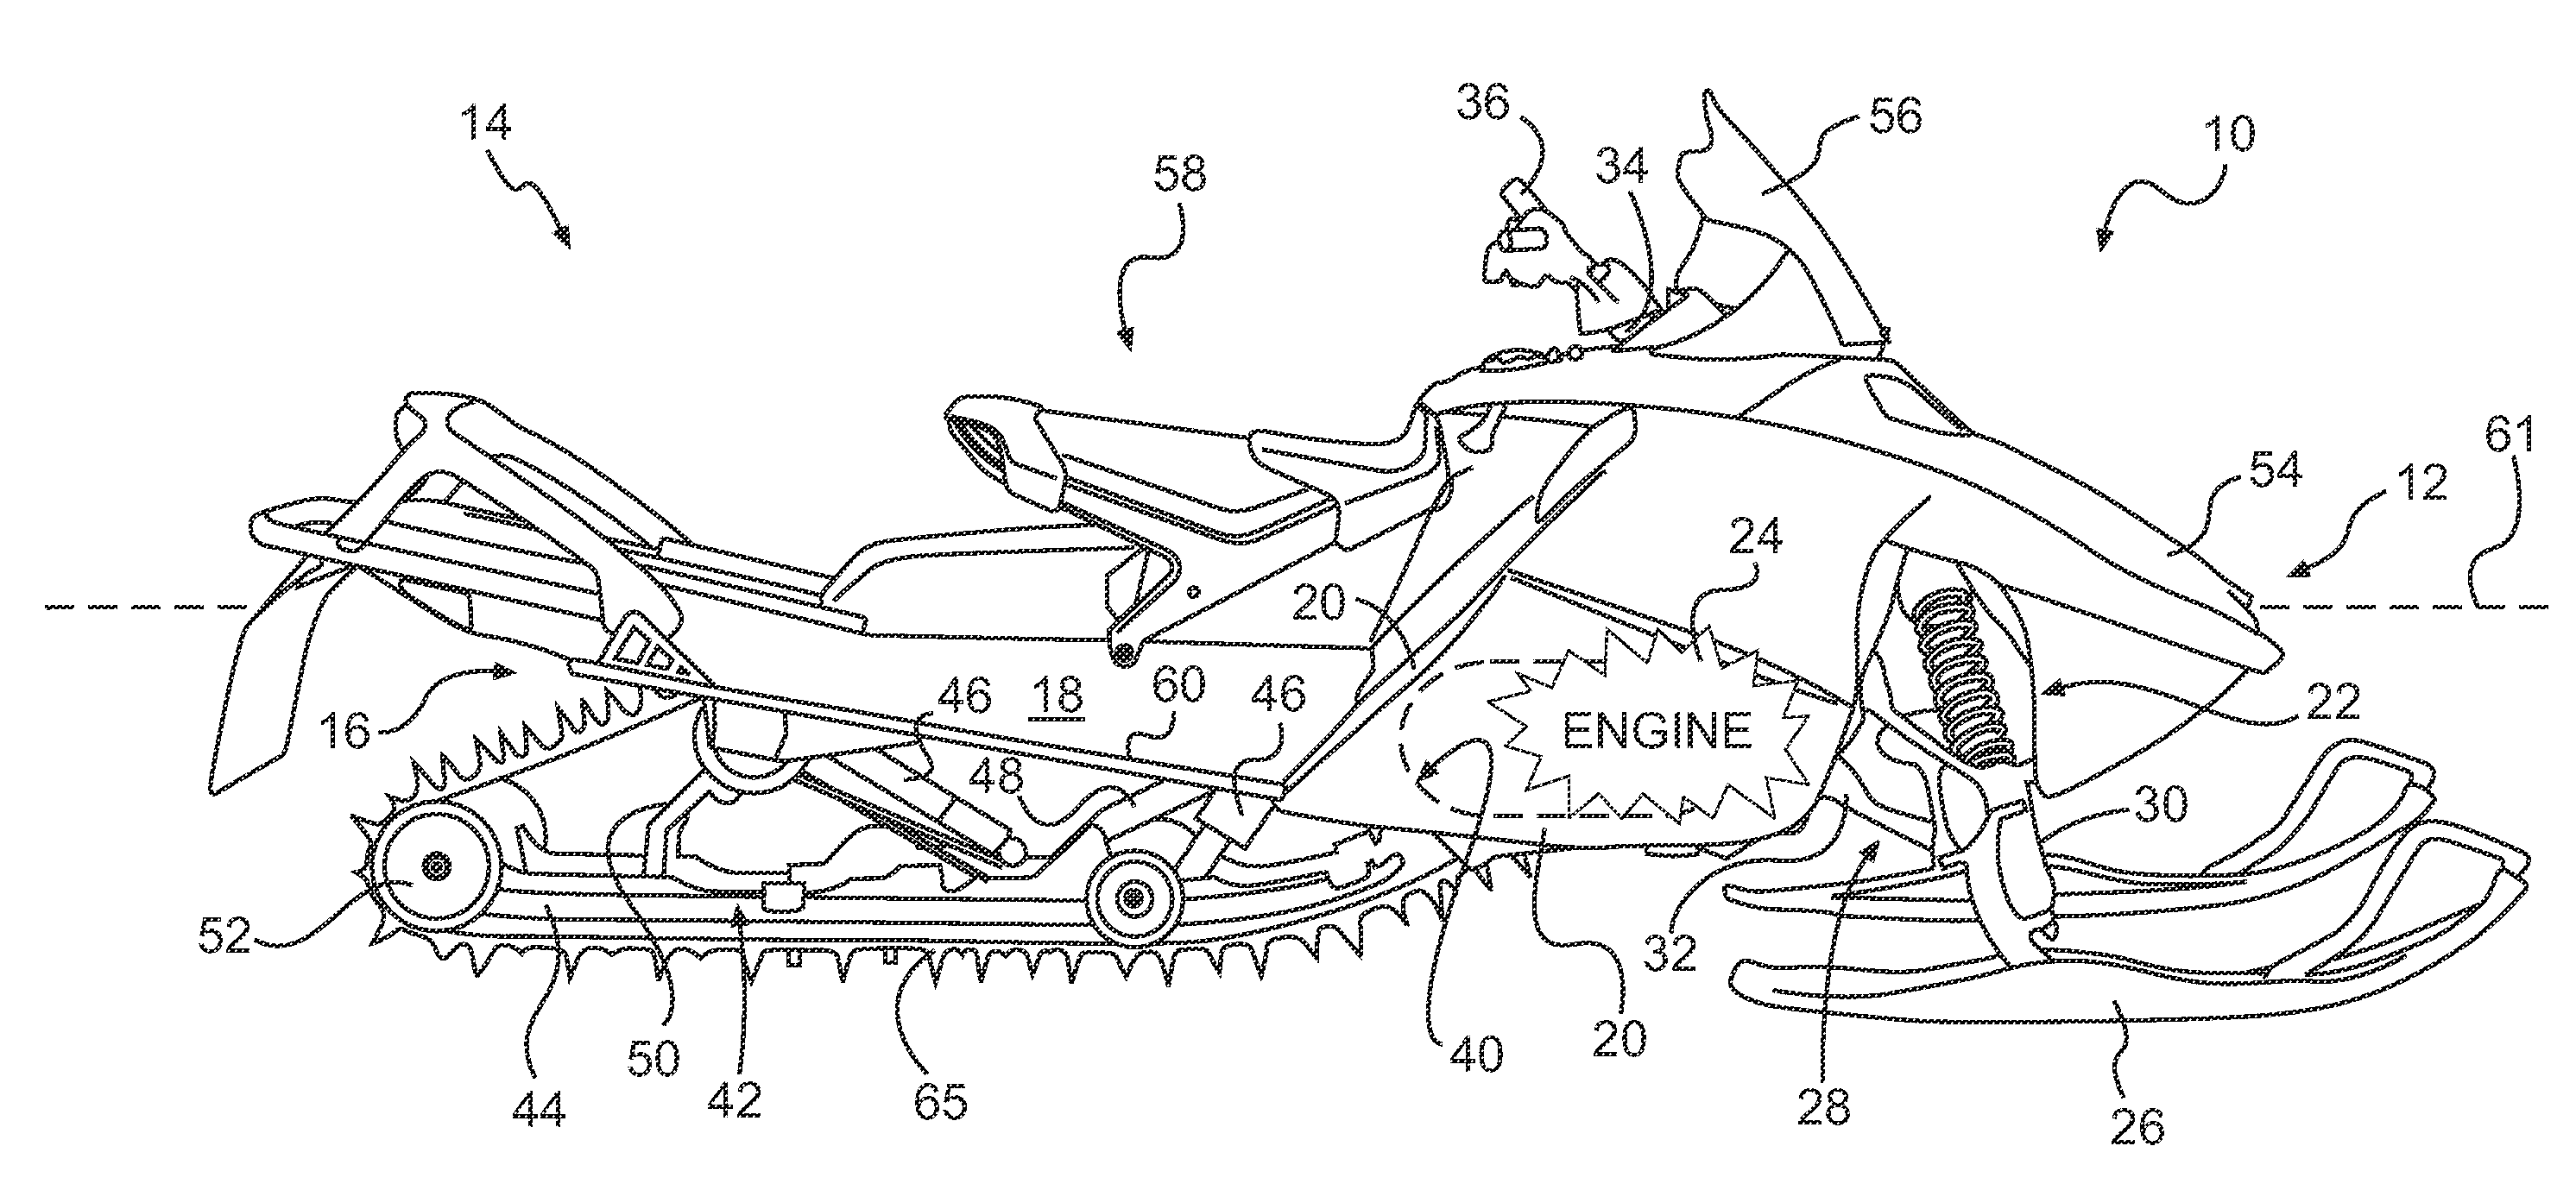 Snowmobile with improved drive train